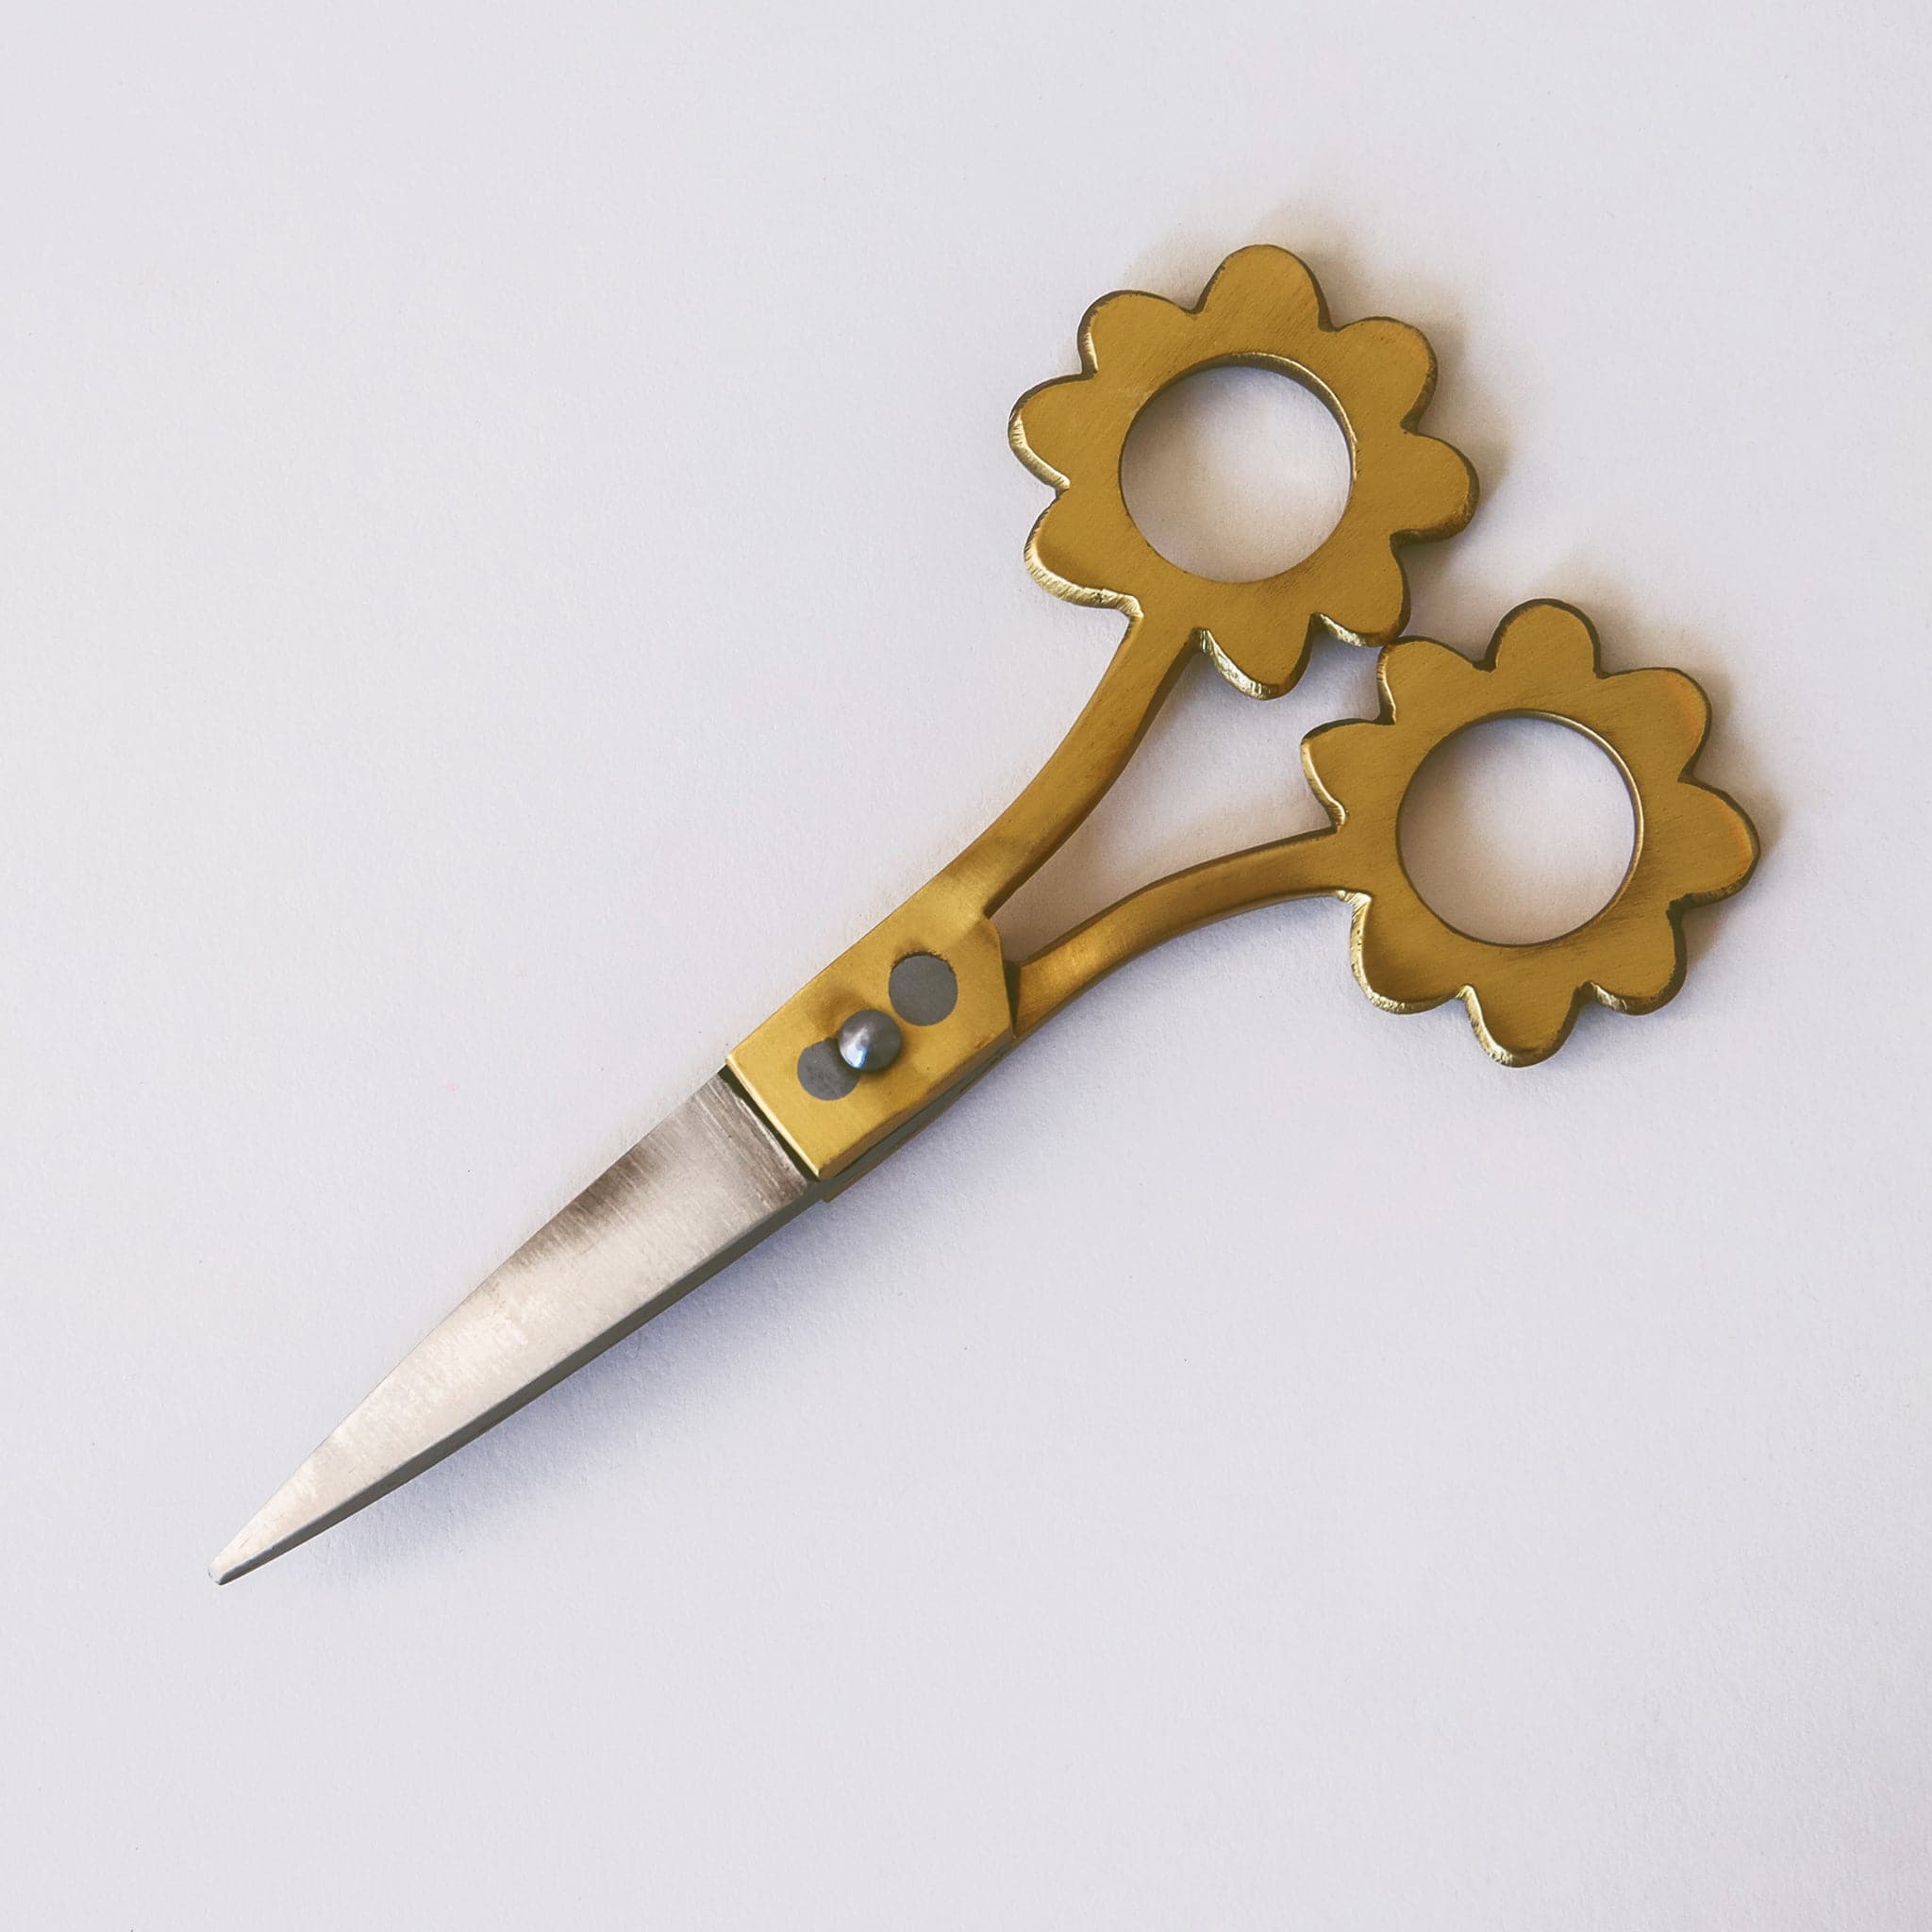 These scissors have stainless steel blades and brass handles. The holes to place your fingers through are in the shape of flowers.